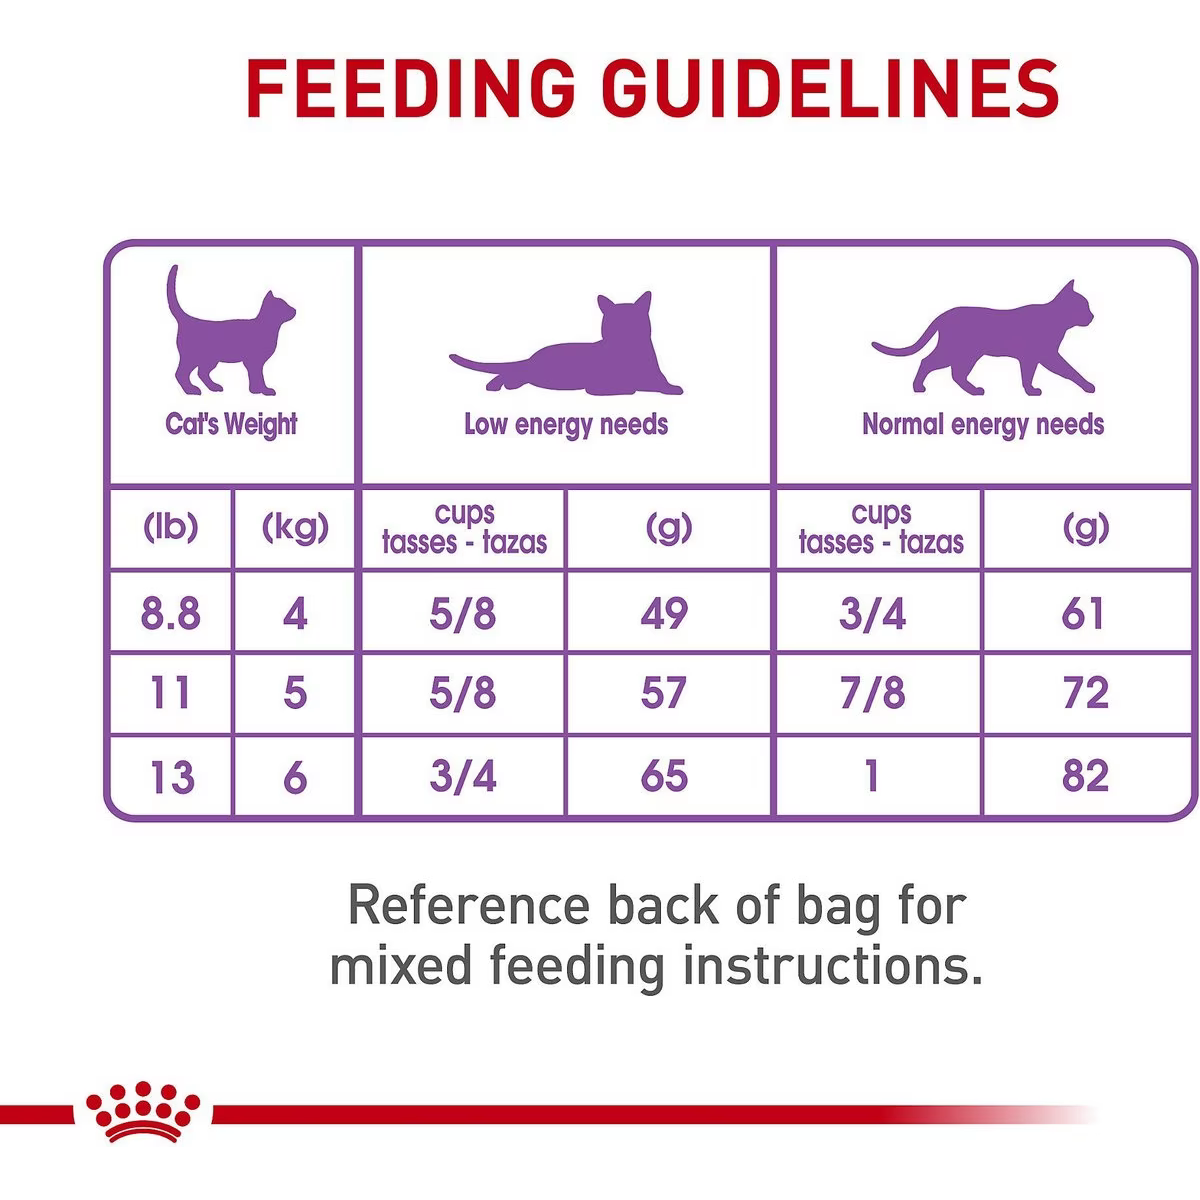 Royal Canin Feline Care Nutrition Appetite Control Care Spayed/Neutered Adult Dry Cat Food  Cat Food  | PetMax Canada